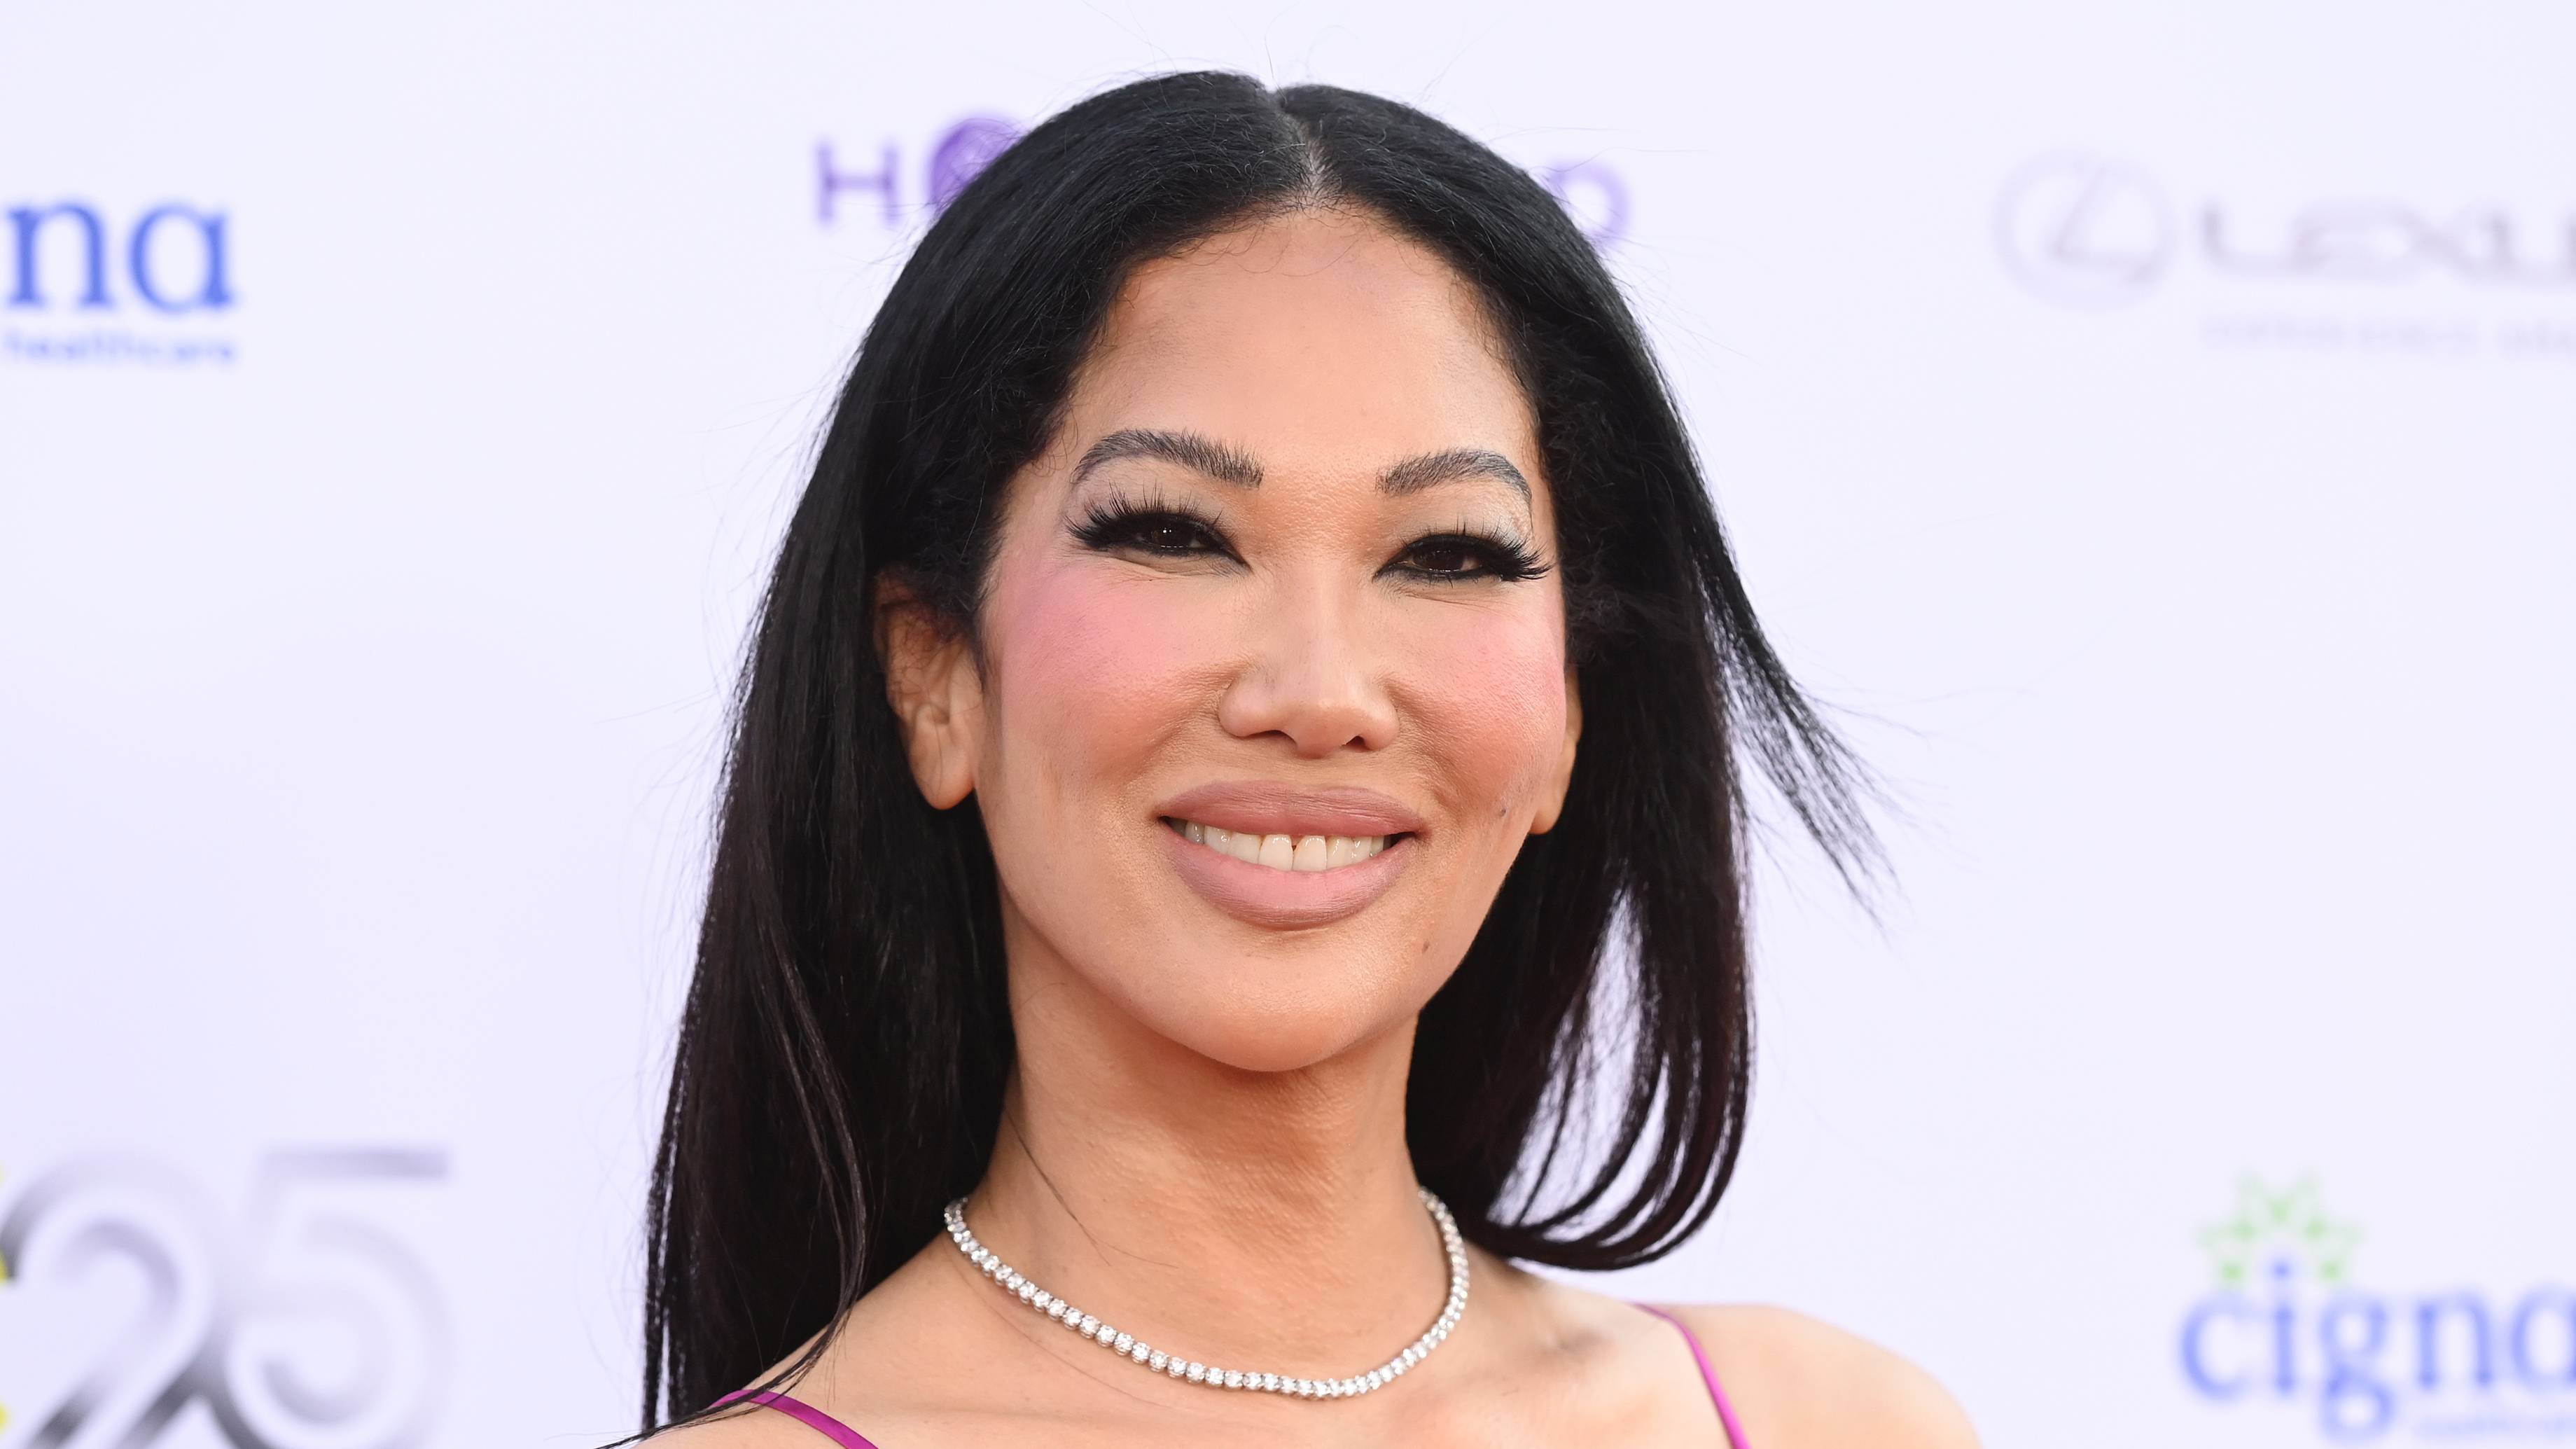 Kimora Lee Simmons at the Hollyrod 2023 Designcare Gala held at The Beehive on July 15, 2023 in Los Angeles, California. 